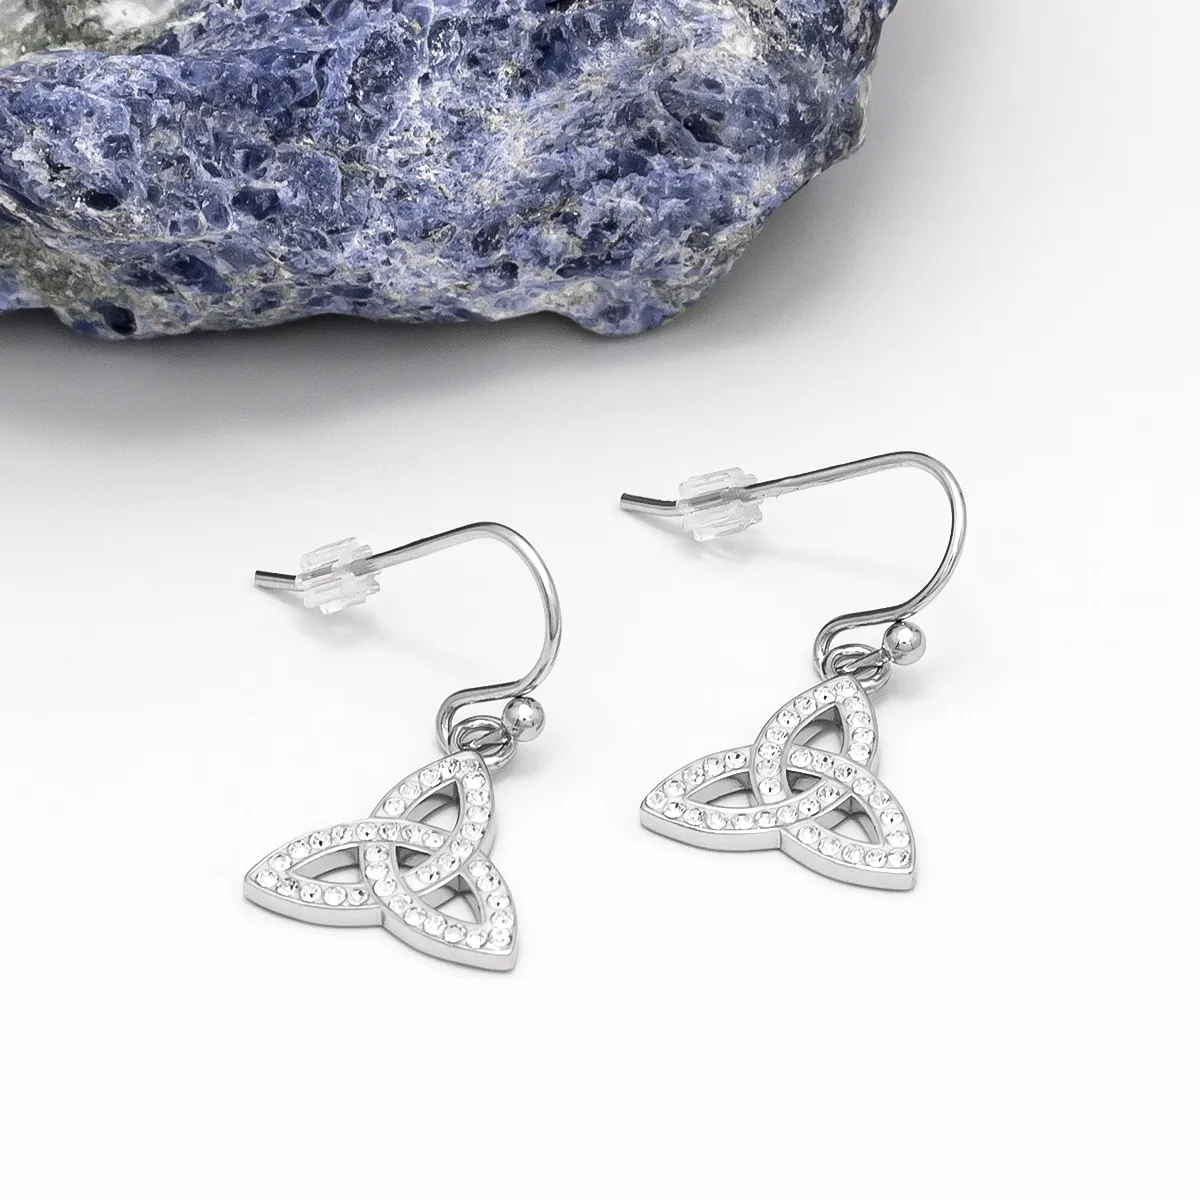 Silver Trinity Knot Earrings with Crystals